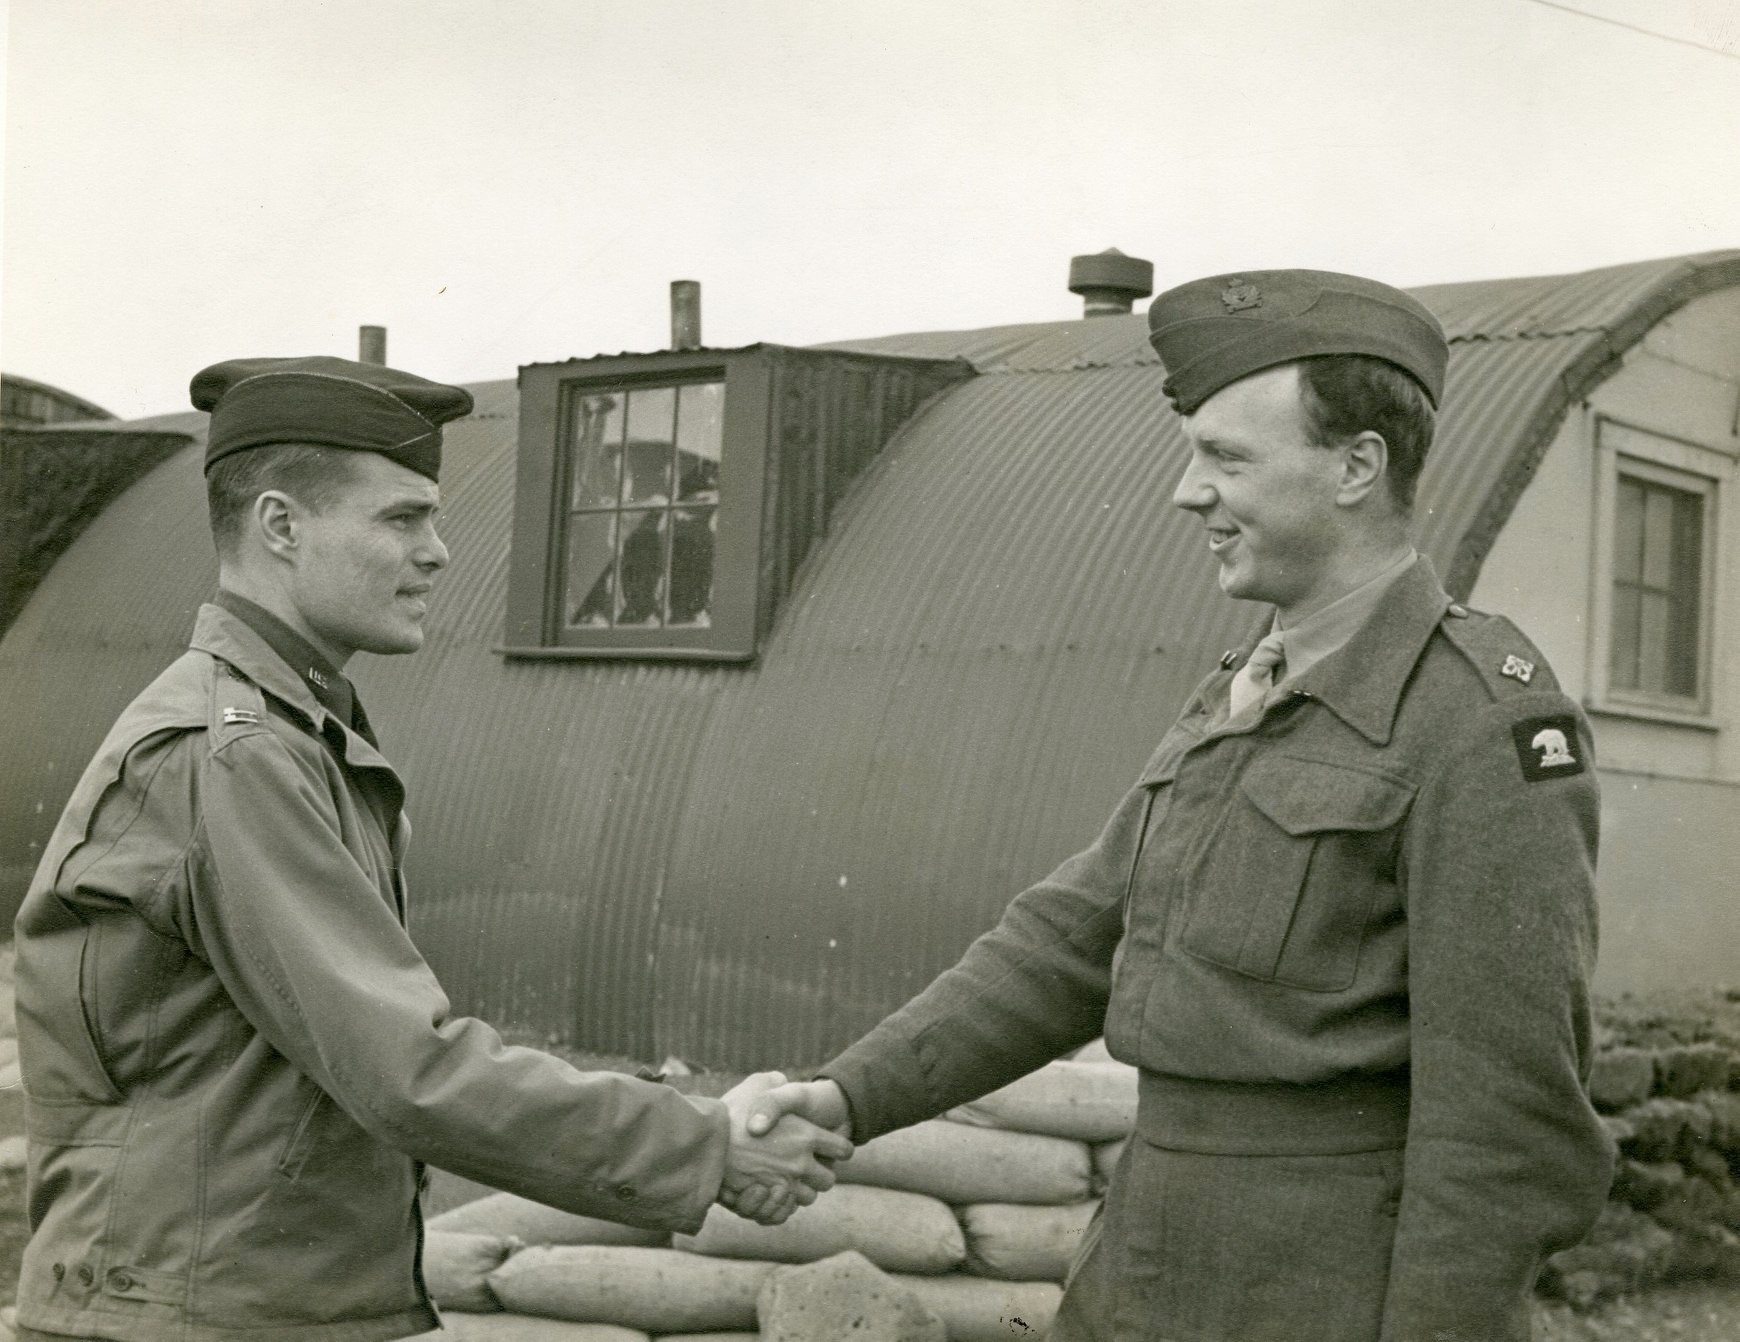 Ralph handshake with another soldier